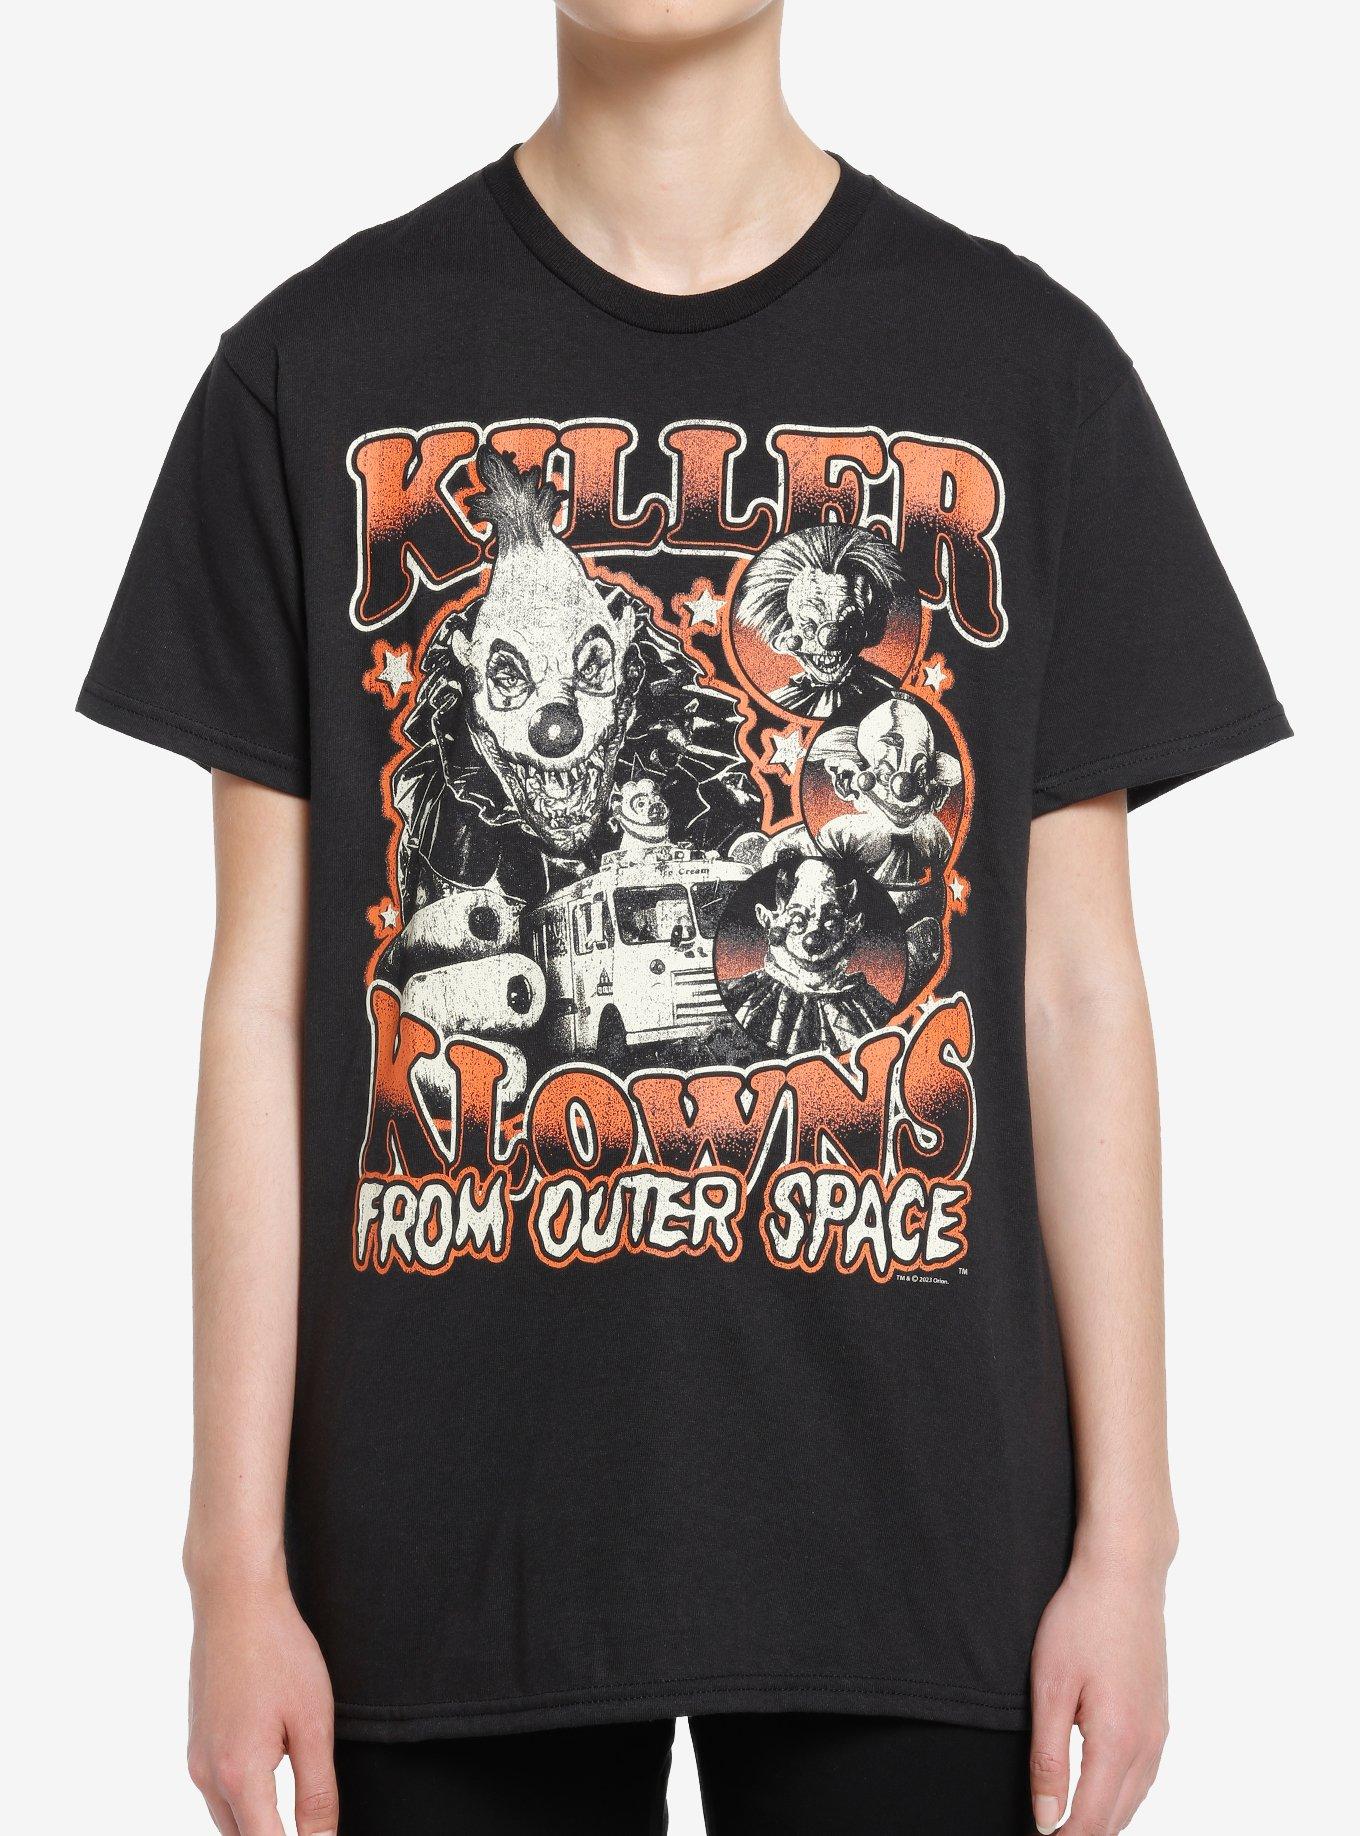 Killer Klowns From Outer Space Collage Boyfriend Fit Girls T-Shirt